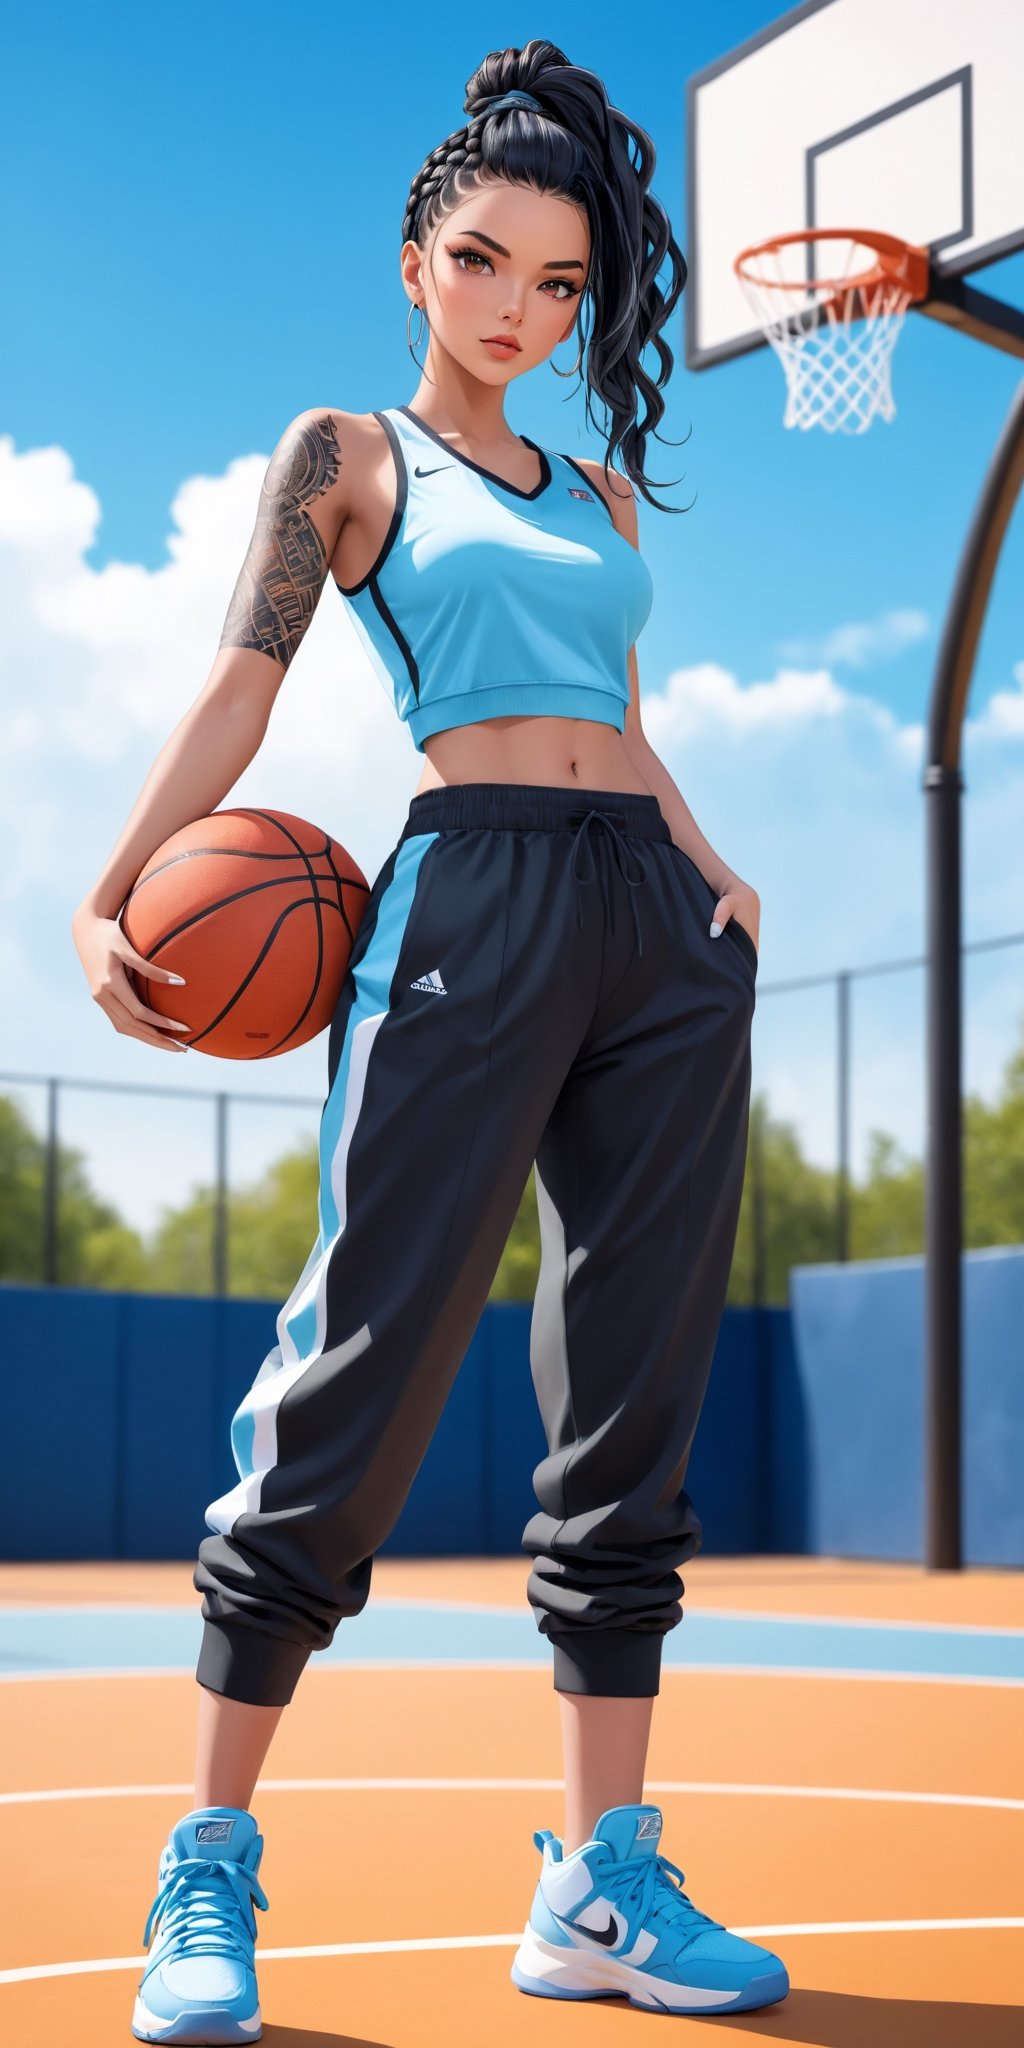 (masterpiece, high quality, 8K, high_res:1.5), 
fashion professional photoshot in anime style, realistic, 
beautiful woman, Latina supermodel, black braided hair, biomechanical tattoo, incredible figure,
clothing \sport top, baggy breeches, basketball shoes\,
outdoor basketball court background, 
fashion, stylish, colorful, sensual, beautiful, elegant, impudent, trending on fashion magazines, trending on sport magazines, perfectionism,
((ink lines and watercolor wash)),,Vector illustration,Illustration